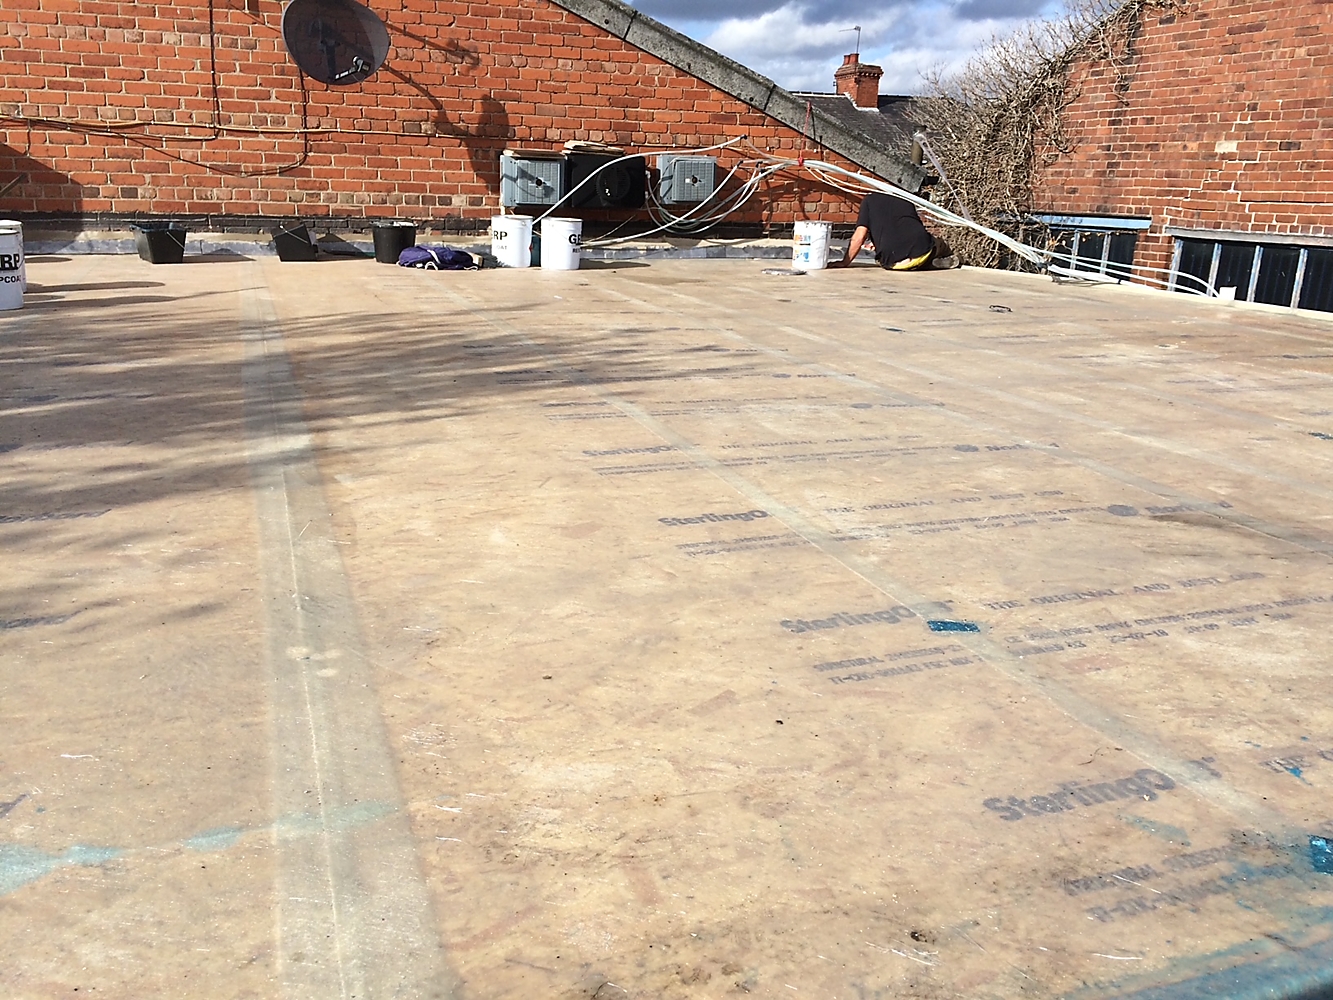 GRP Flat Roofing — Base coat and interlocking boards